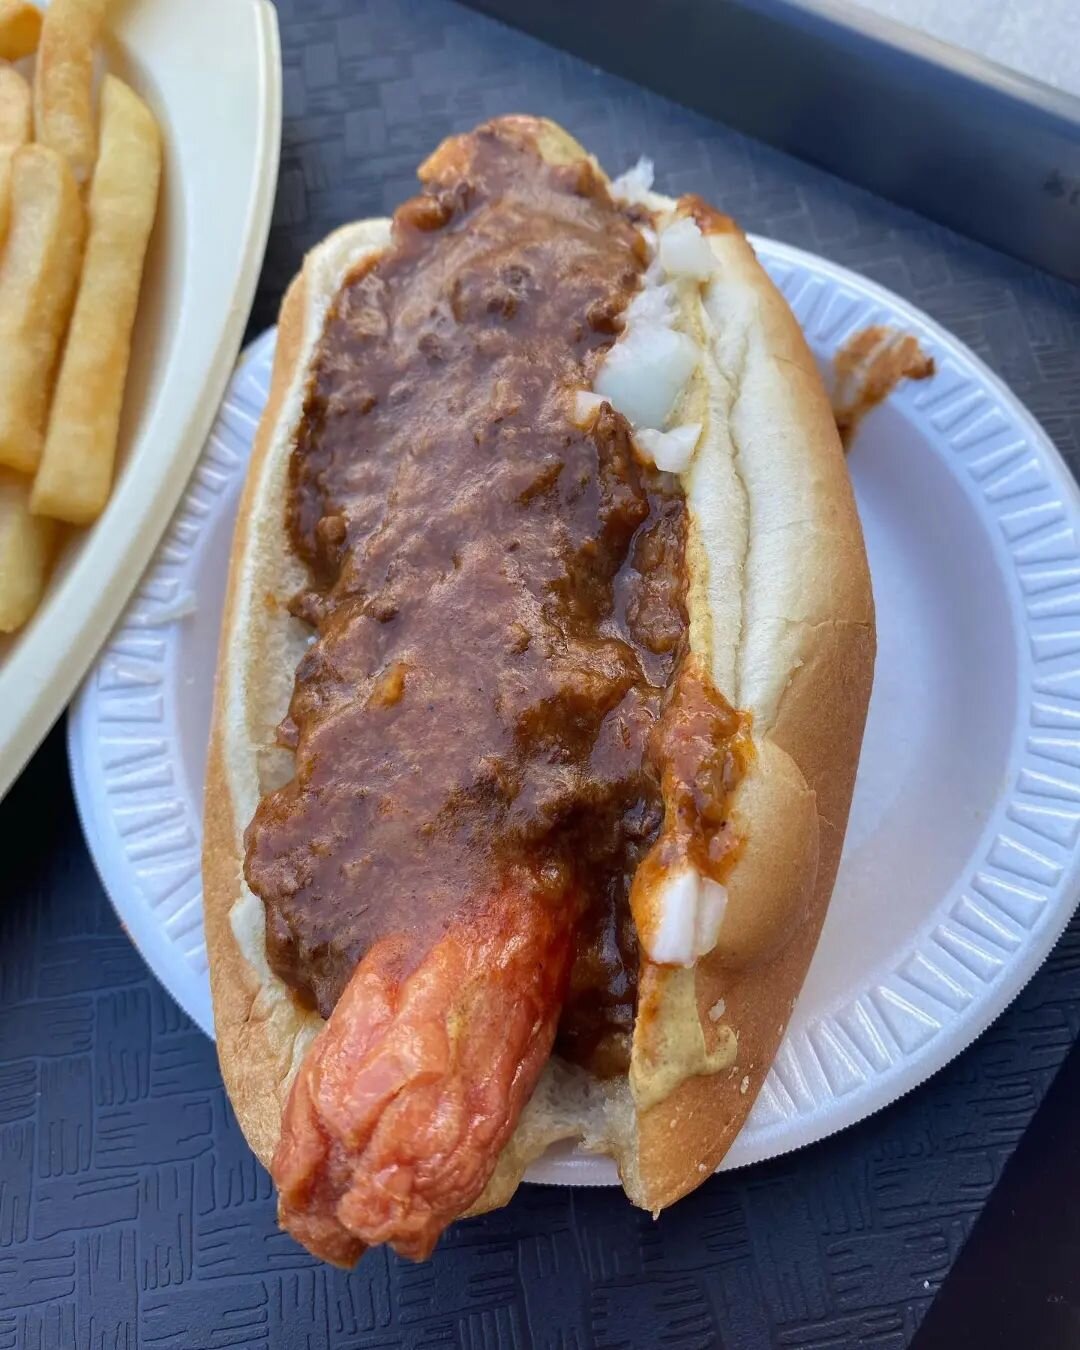 One all the way! 

#thehotgrillofficial
#thehotgrillclifton
#669lexingtonave
#cliftonnj
#worldstastiesttexasweiners 

&ldquo;Makes me want a hot dog real bad.&rdquo; 🇺🇸 #northjerseyeats
Reposted from @northjerseyeats